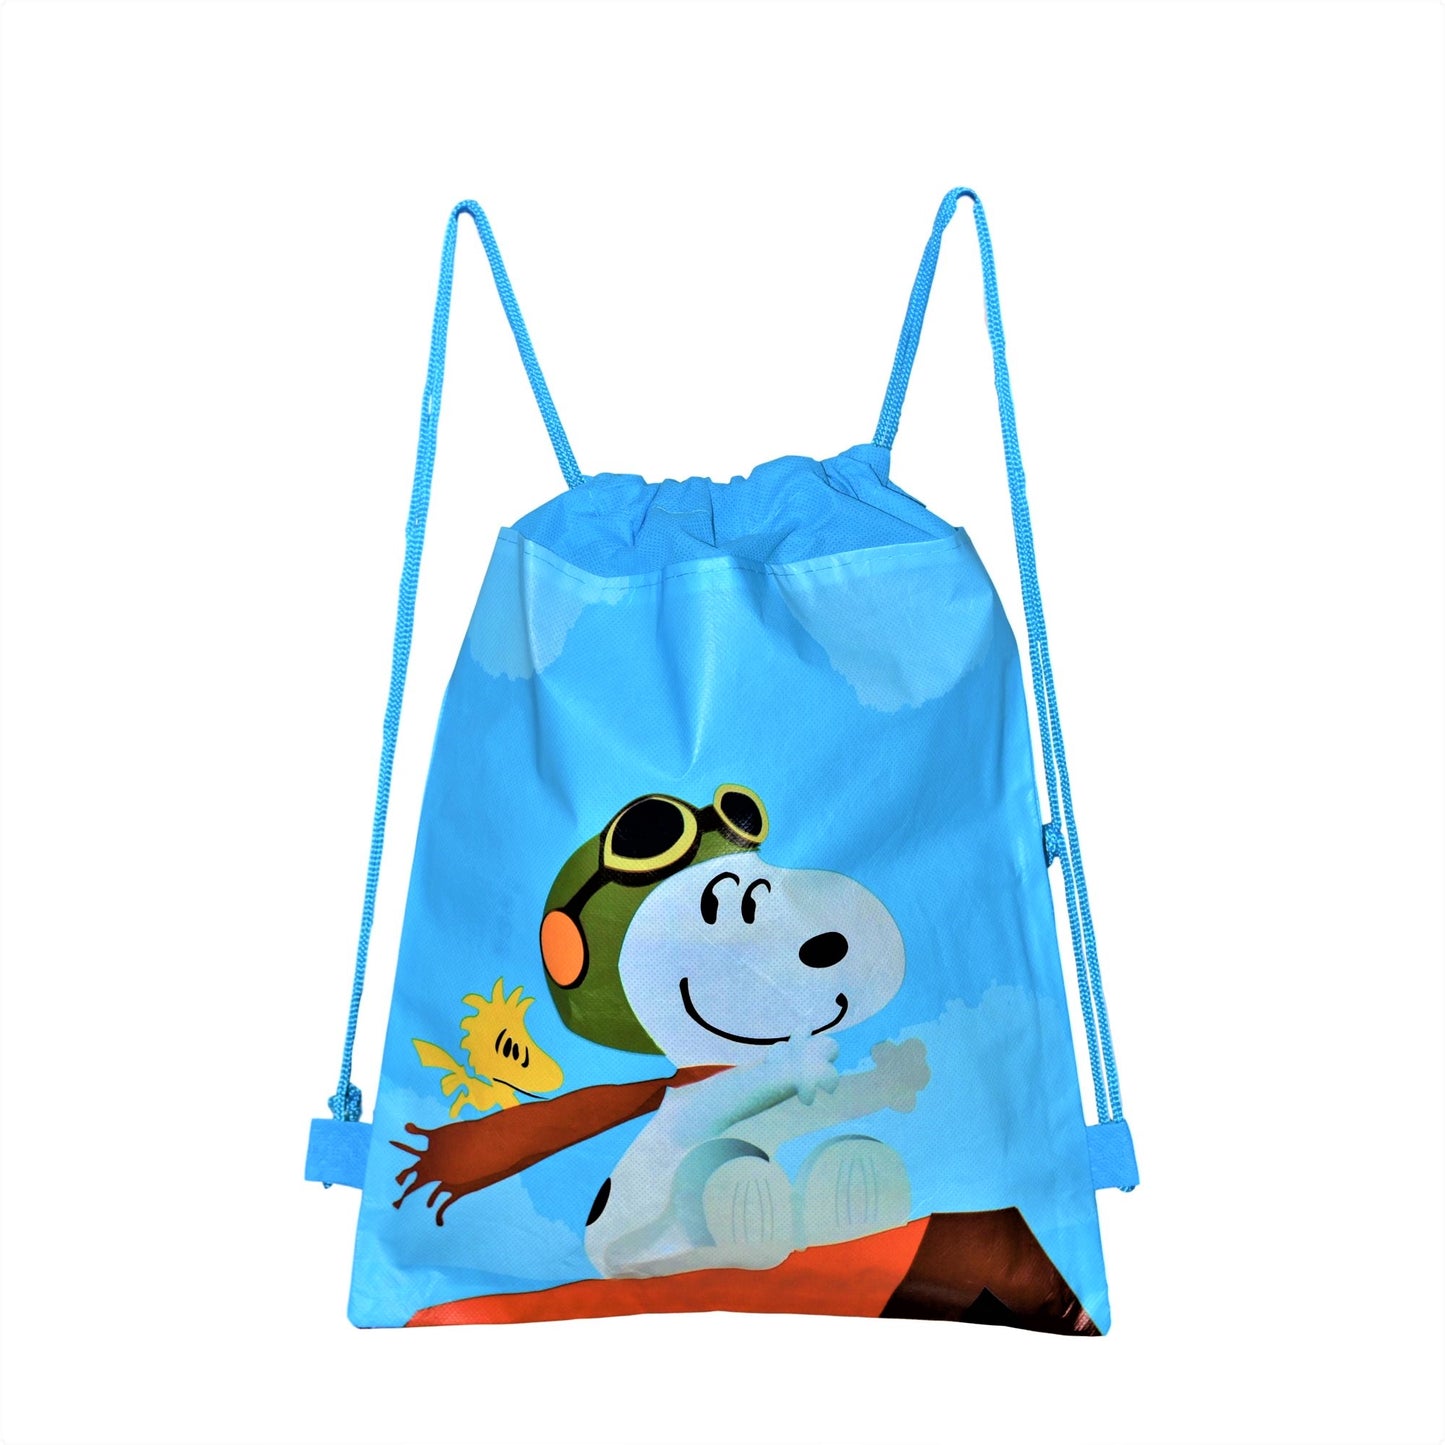 Peanuts Snoopy Cute Non- Woven Large Drawstring Bag For Kids 14" H x 10.5' L. limited Edition.